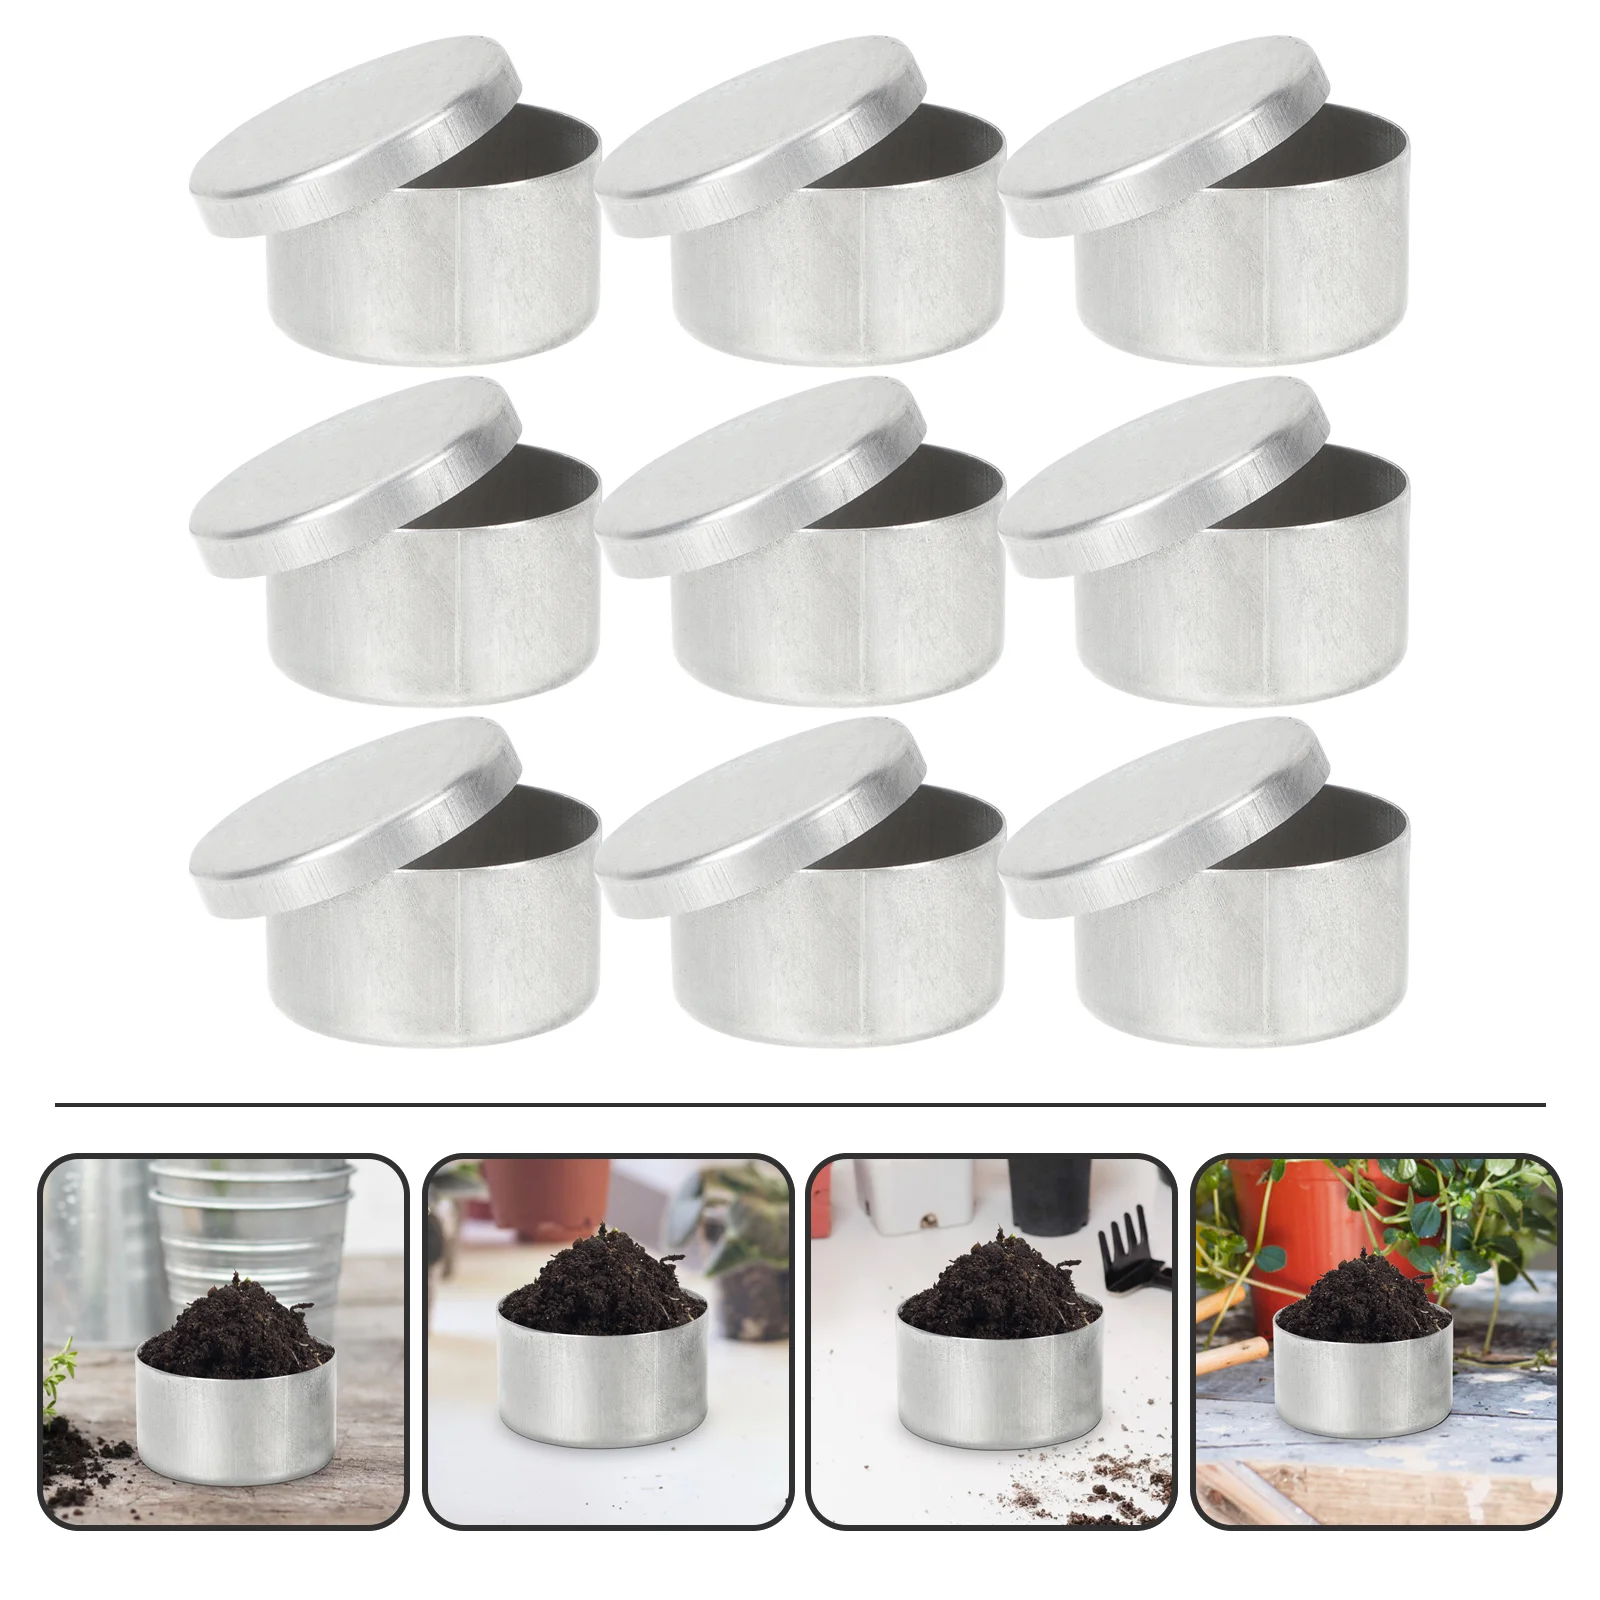 Metal Container with Lid Soil Sampling Box Lip Balm Containers Aluminum Weighing Holders